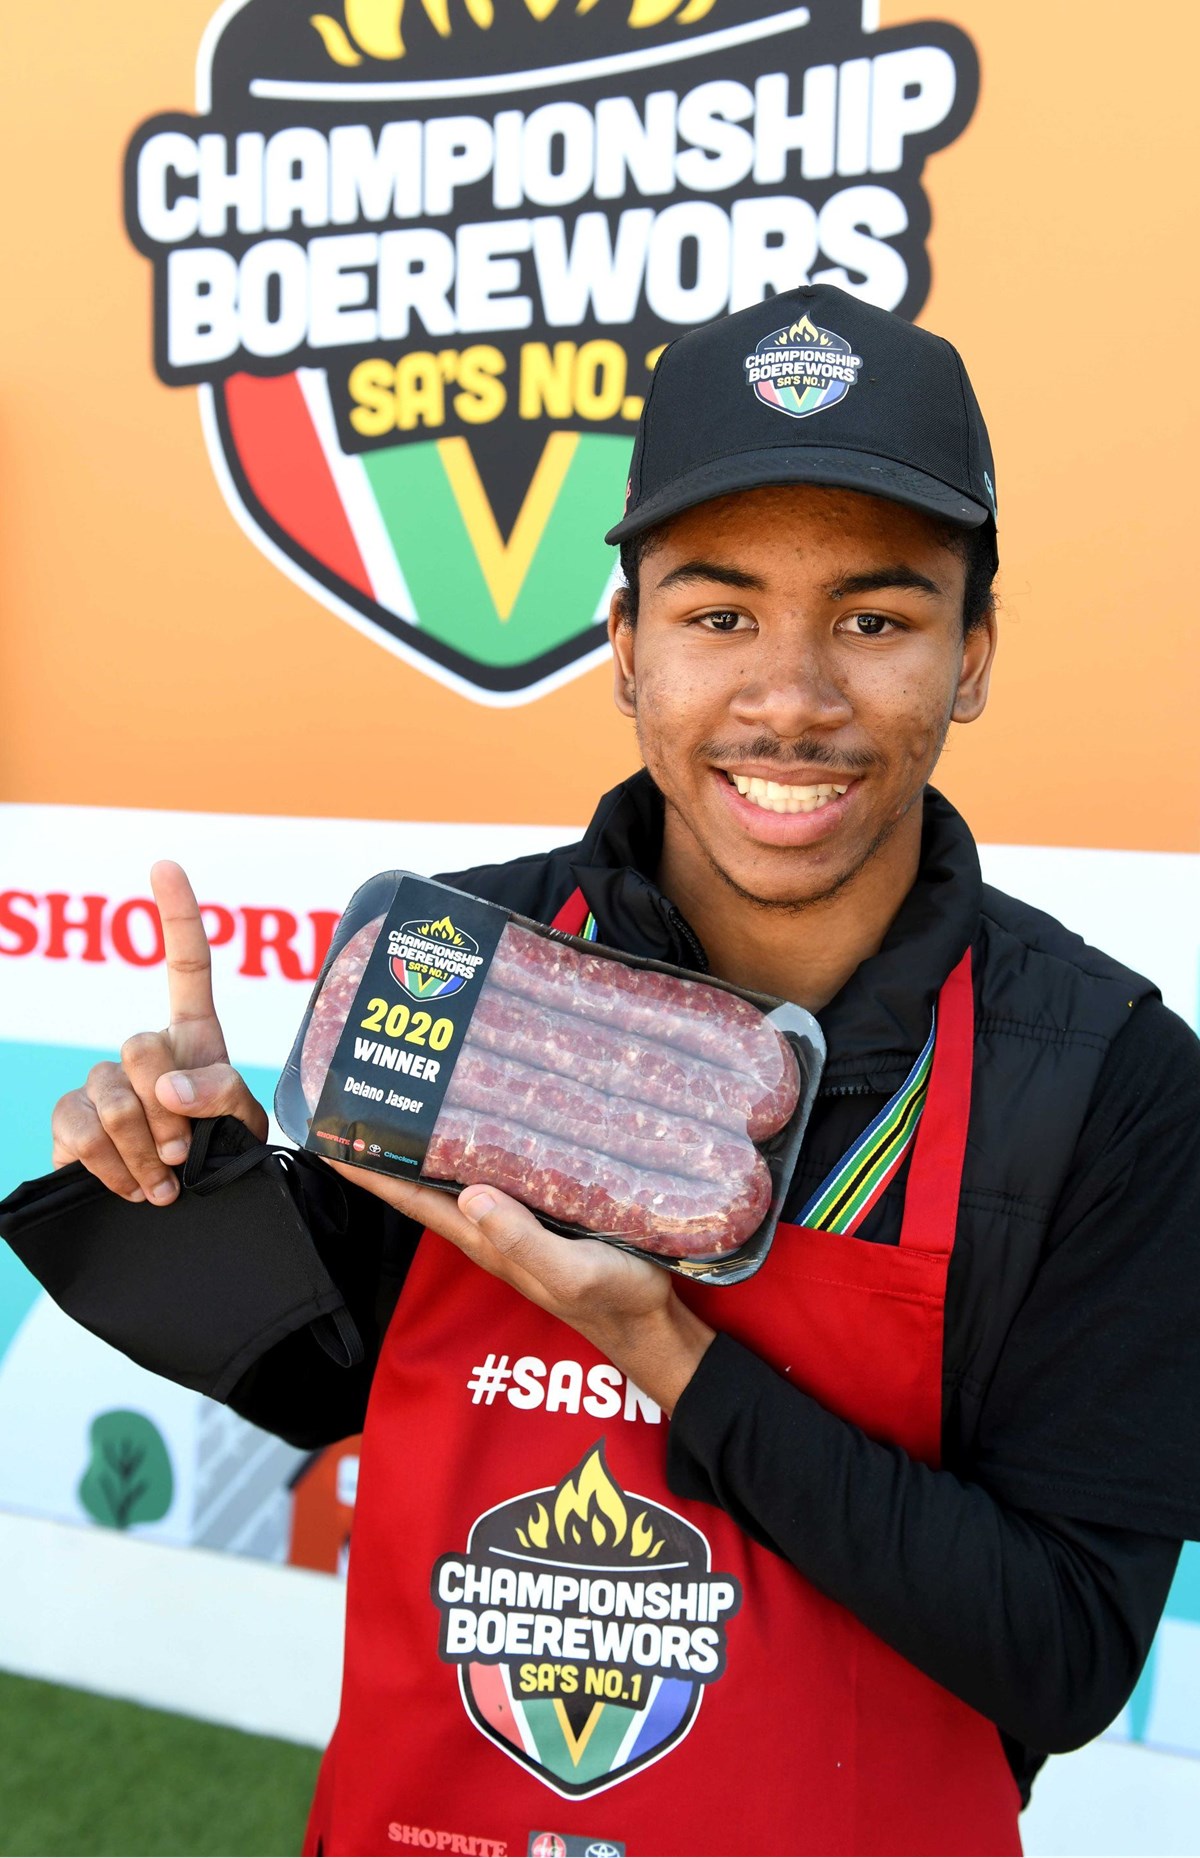 Wellington Student Named South Africa’s Boerewors Champion photo